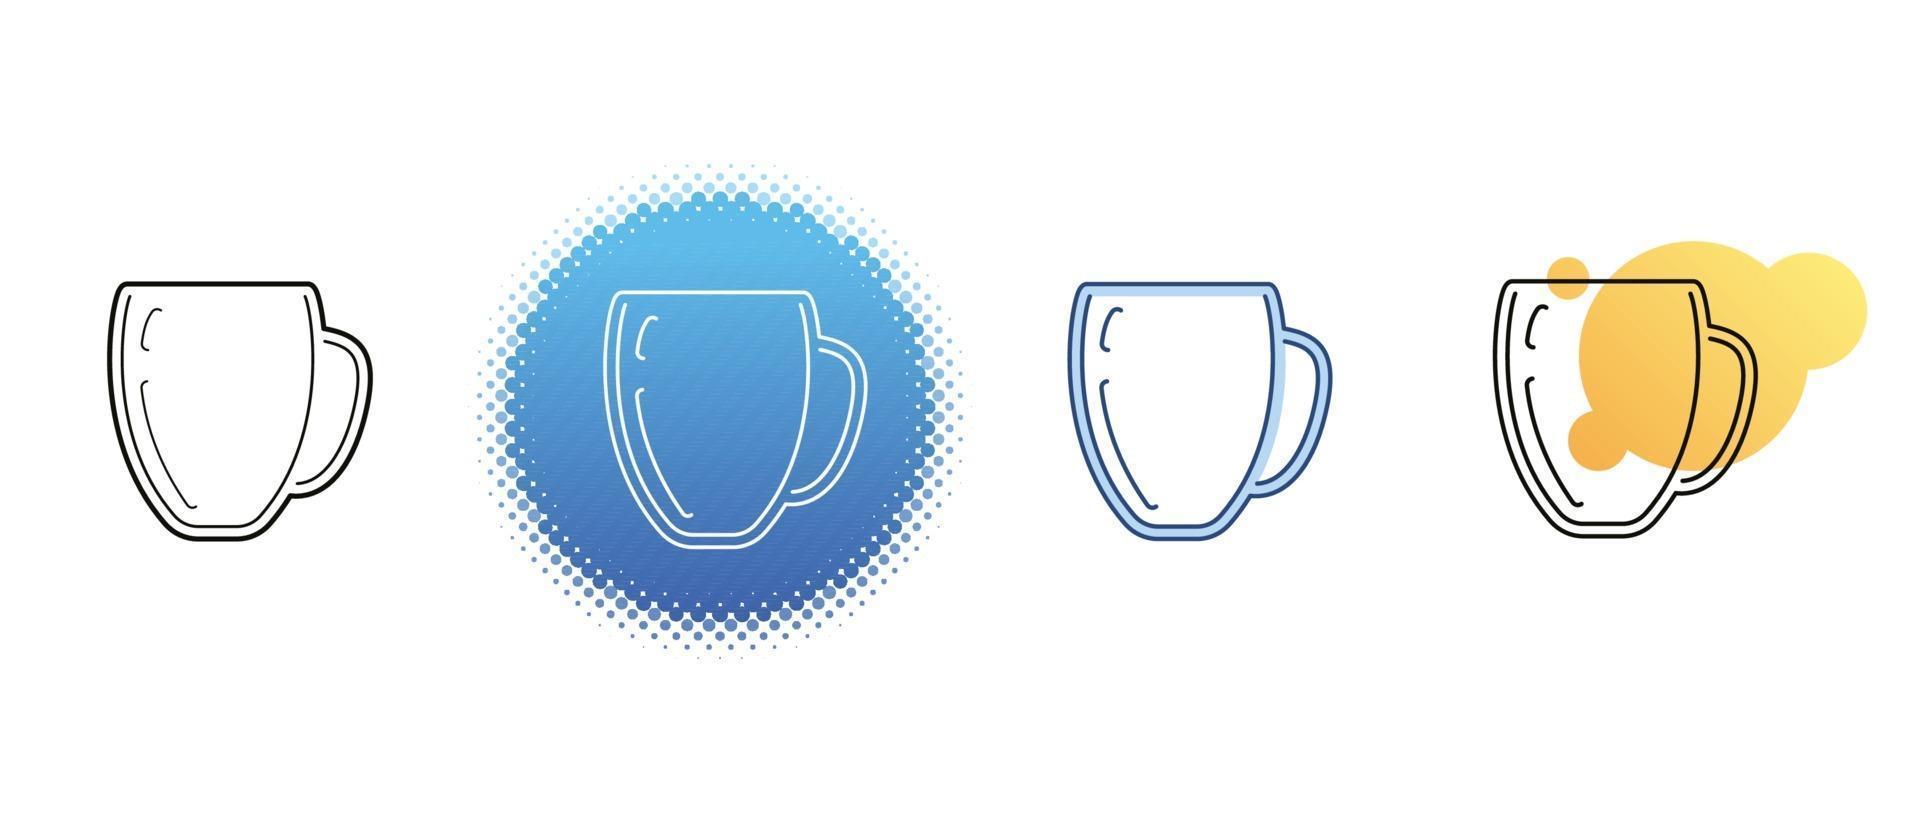 This is a set of contour and color icons of a deep cup vector